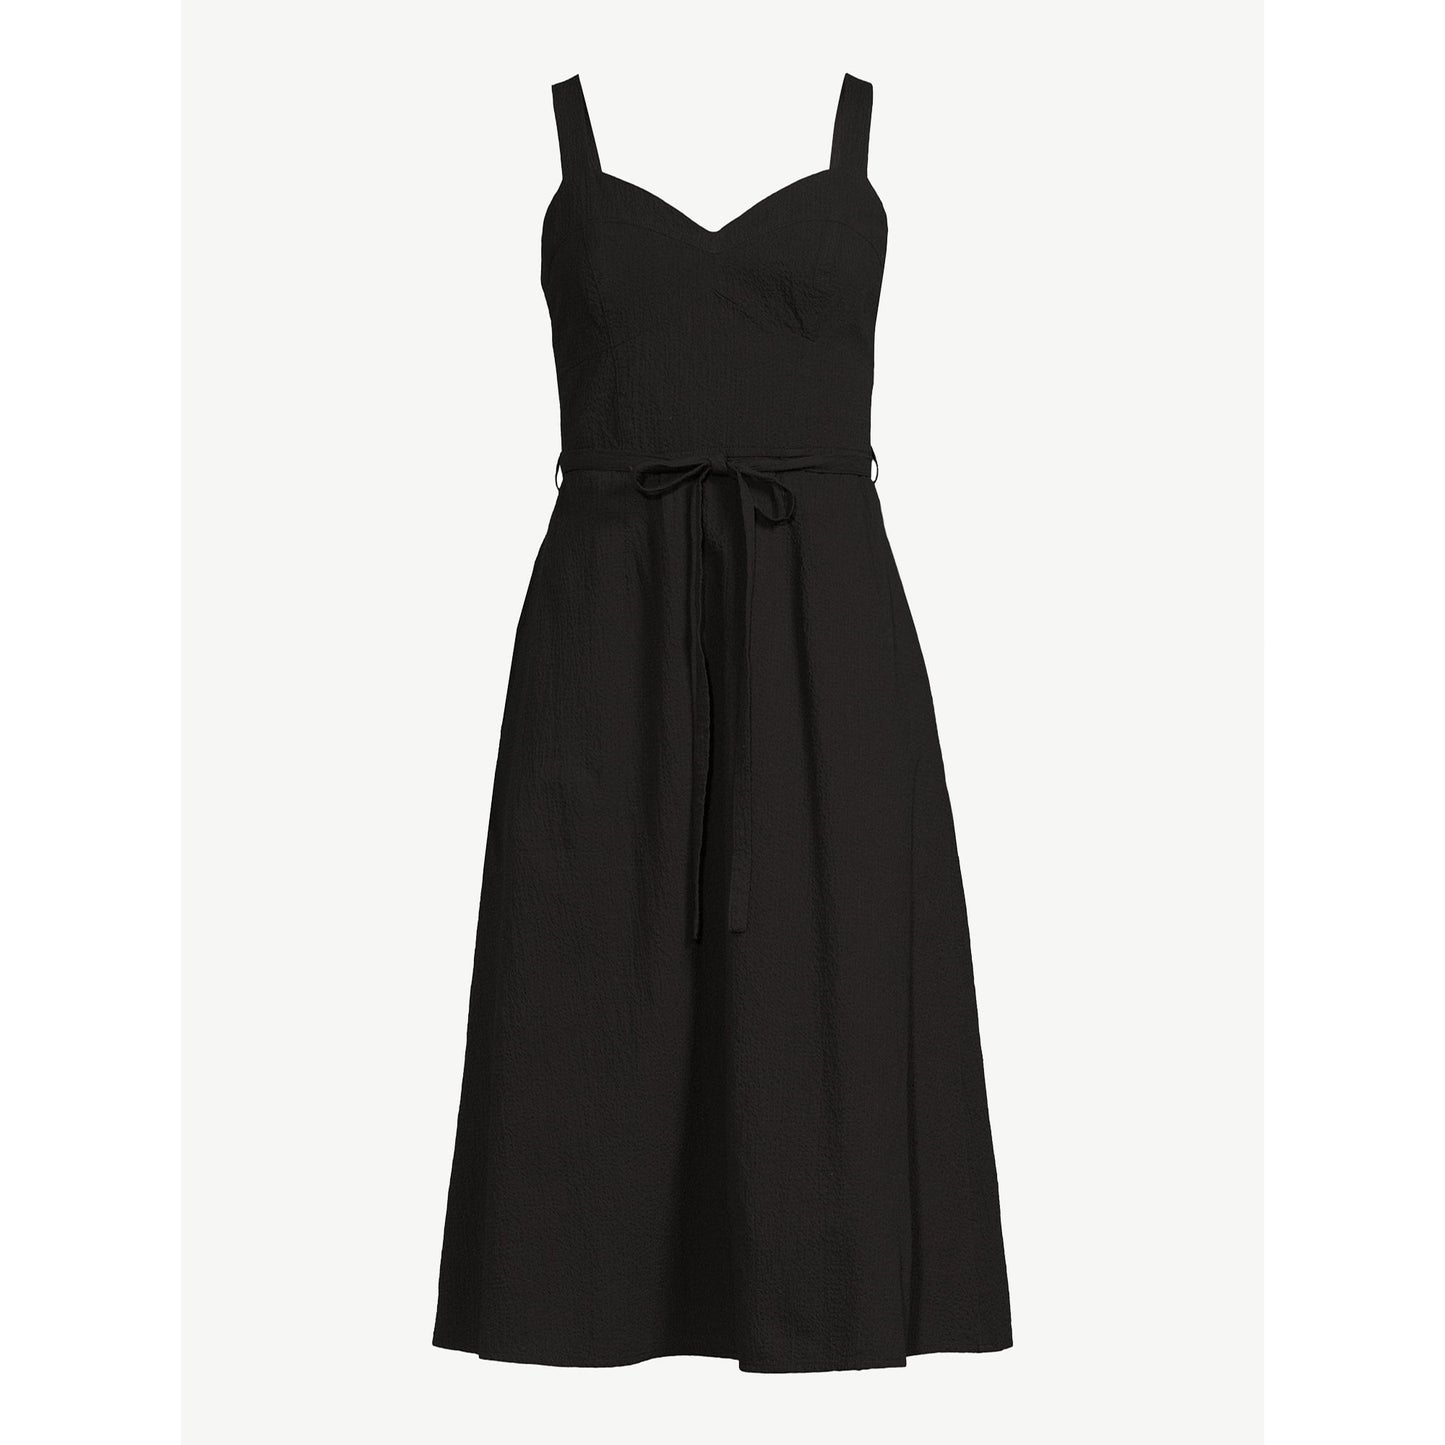 Free Assembly Womens Midi Sundress with Tie Belt,